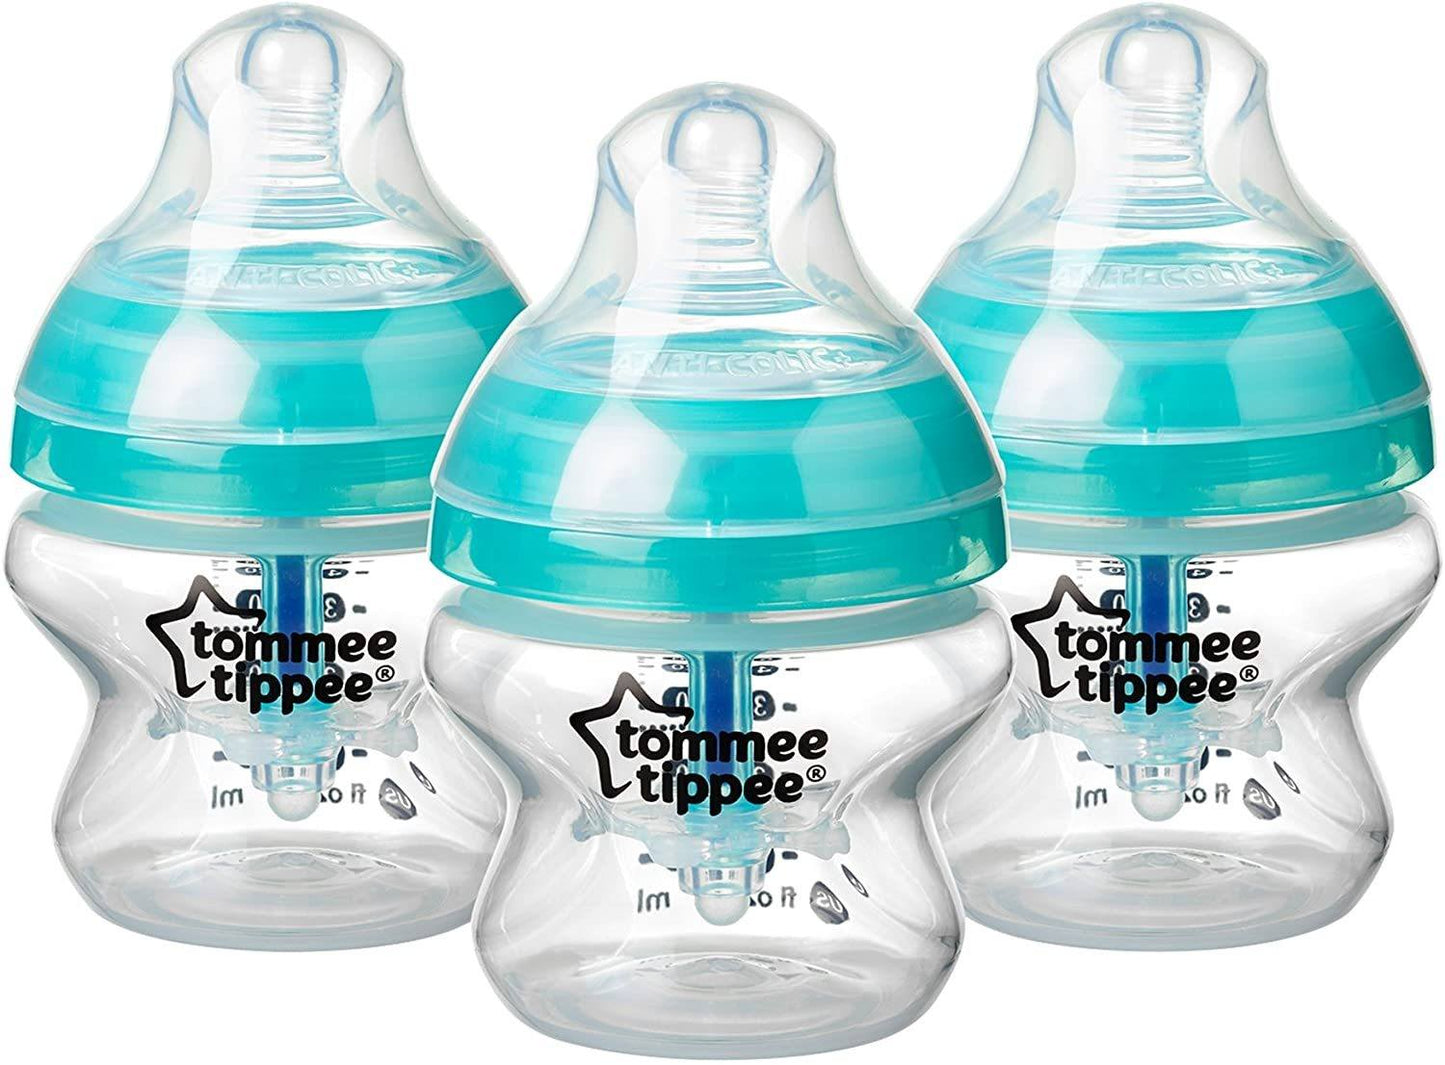 Tomme tippee - Kit de 3 mamadeiras 150 ml Anne Claire Baby Store 